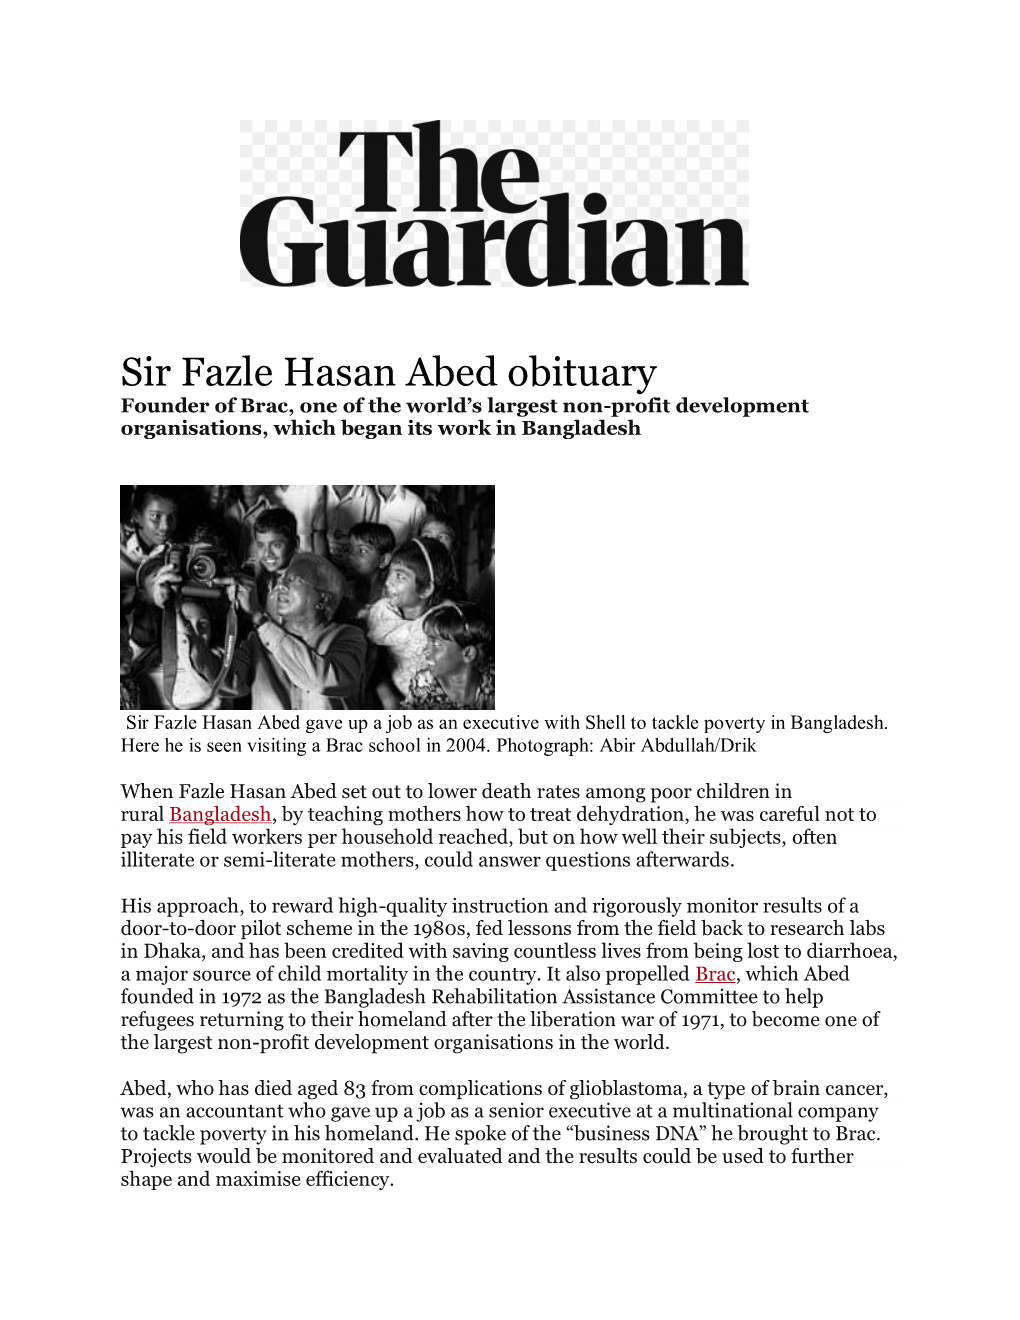 Sir Fazle Hasan Abed Obituary Founder of Brac, One of the World’S Largest Non-Profit Development Organisations, Which Began Its Work in Bangladesh